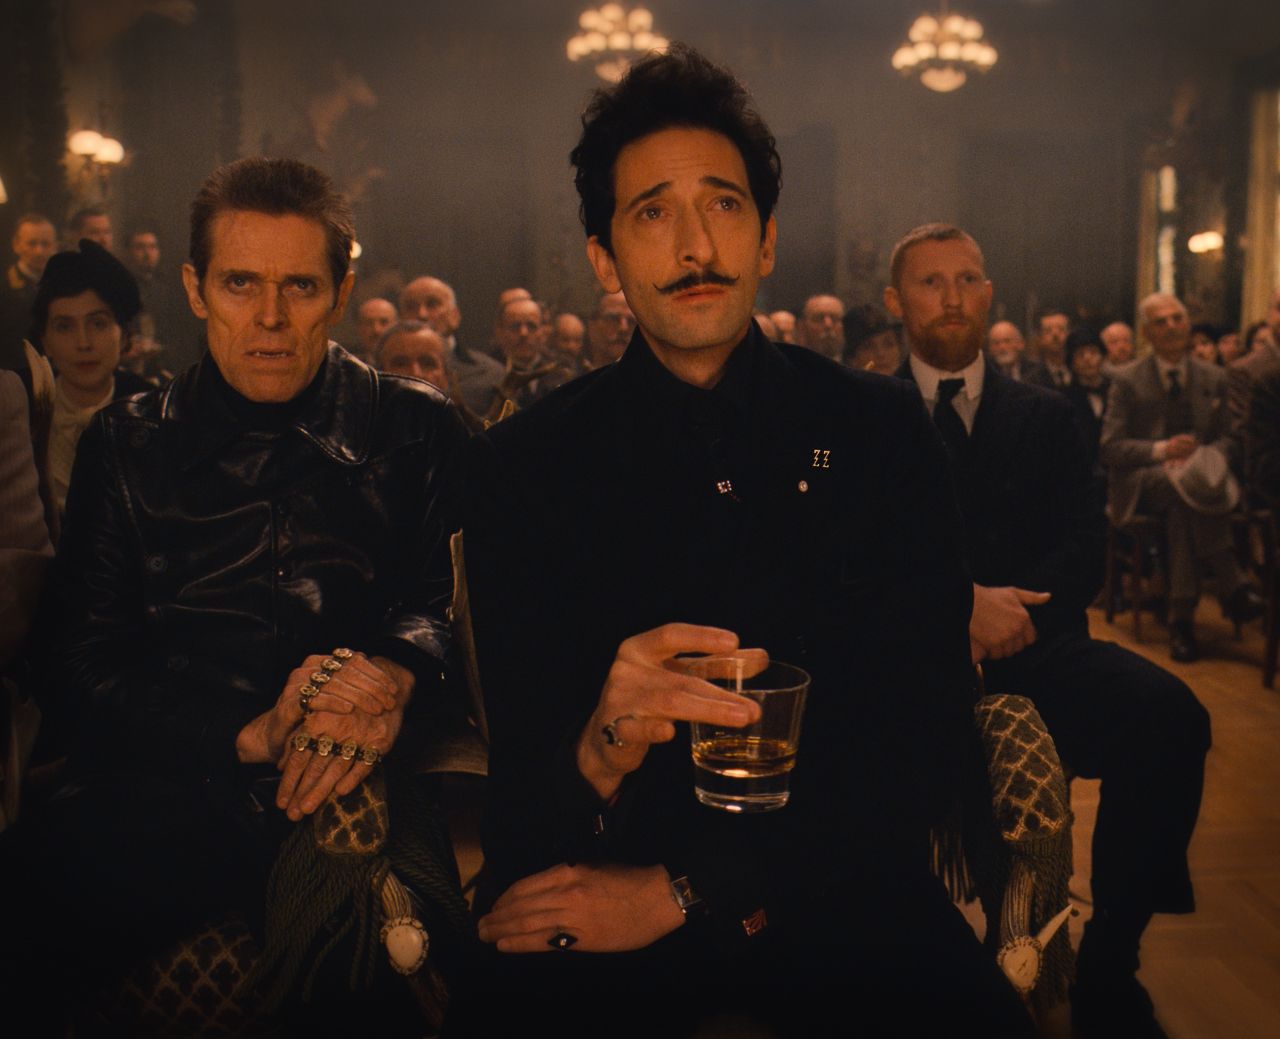 Willem Dafoe and Adrien Brody in The Grand Budapest Hotel